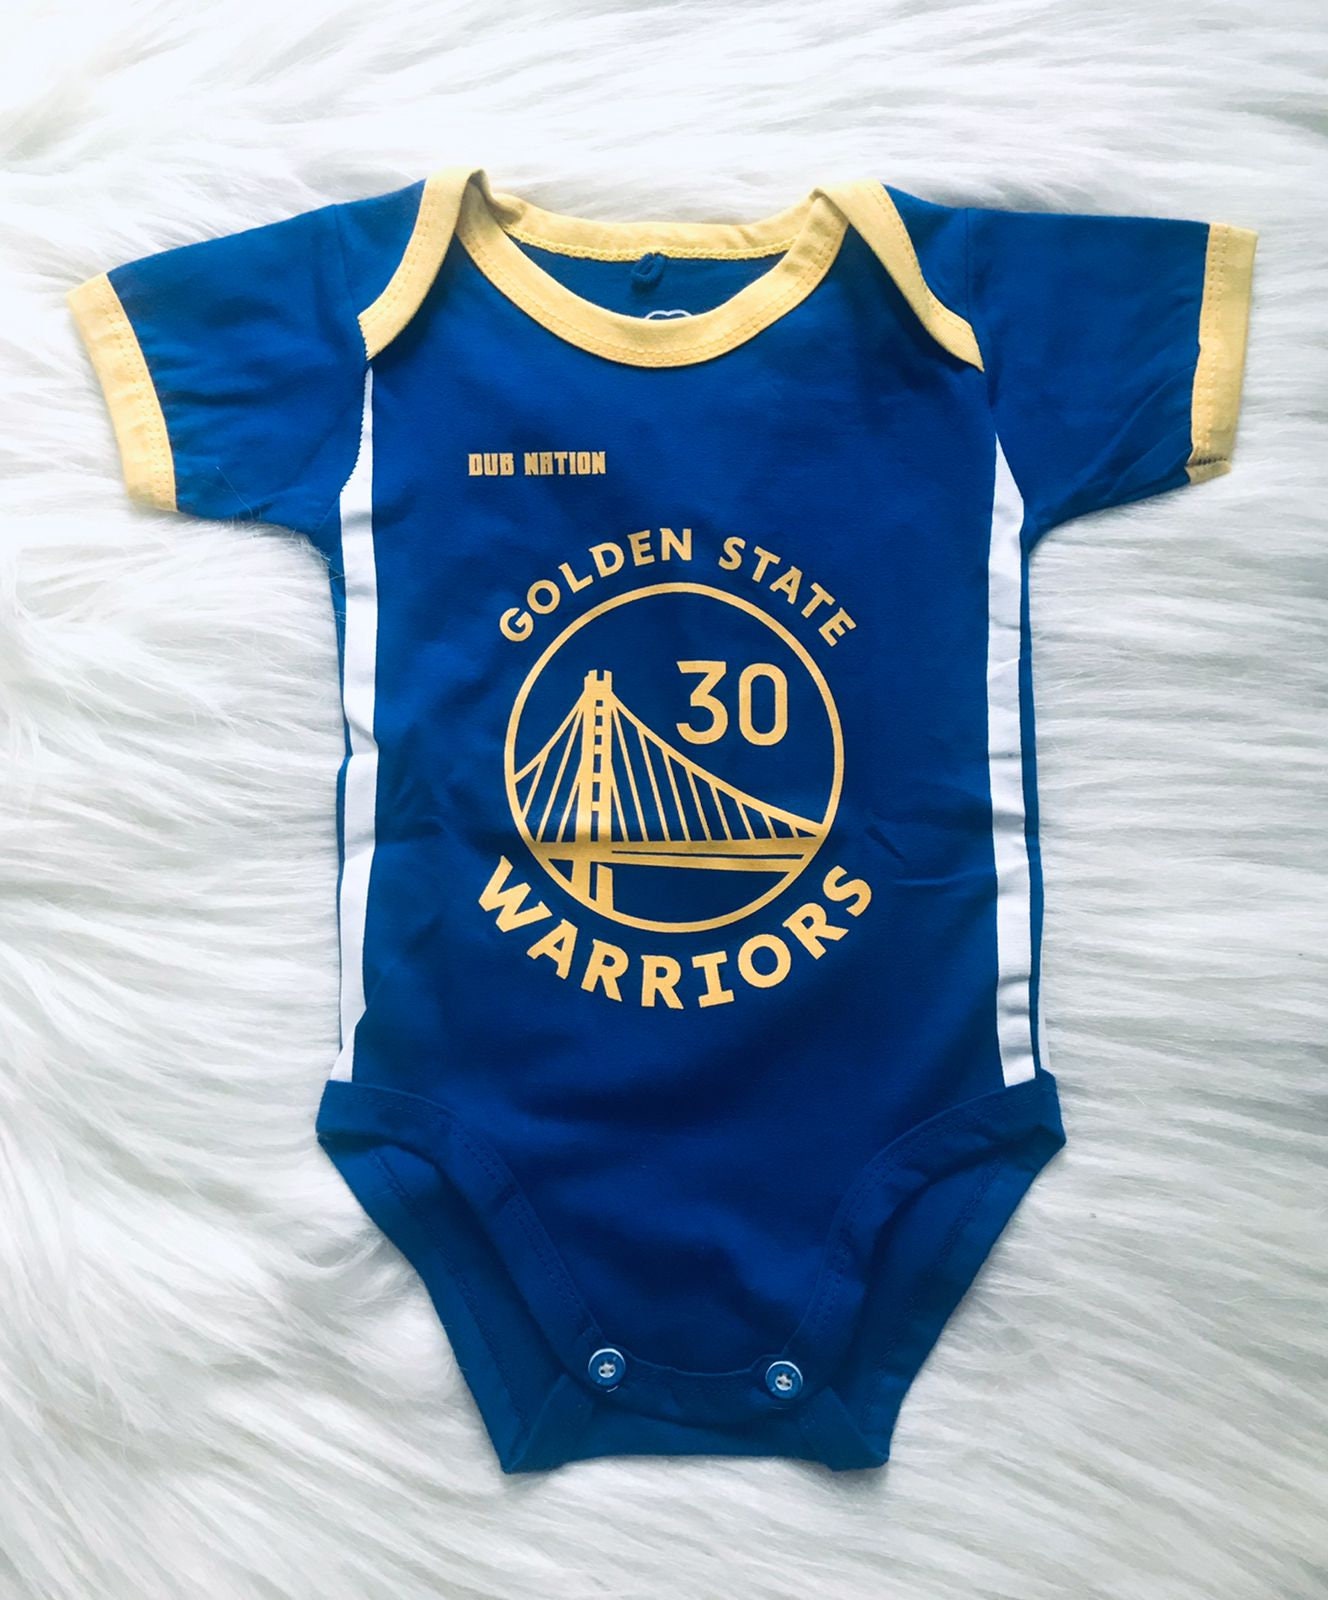 Golden State infantbaby clothes Golden State baby India